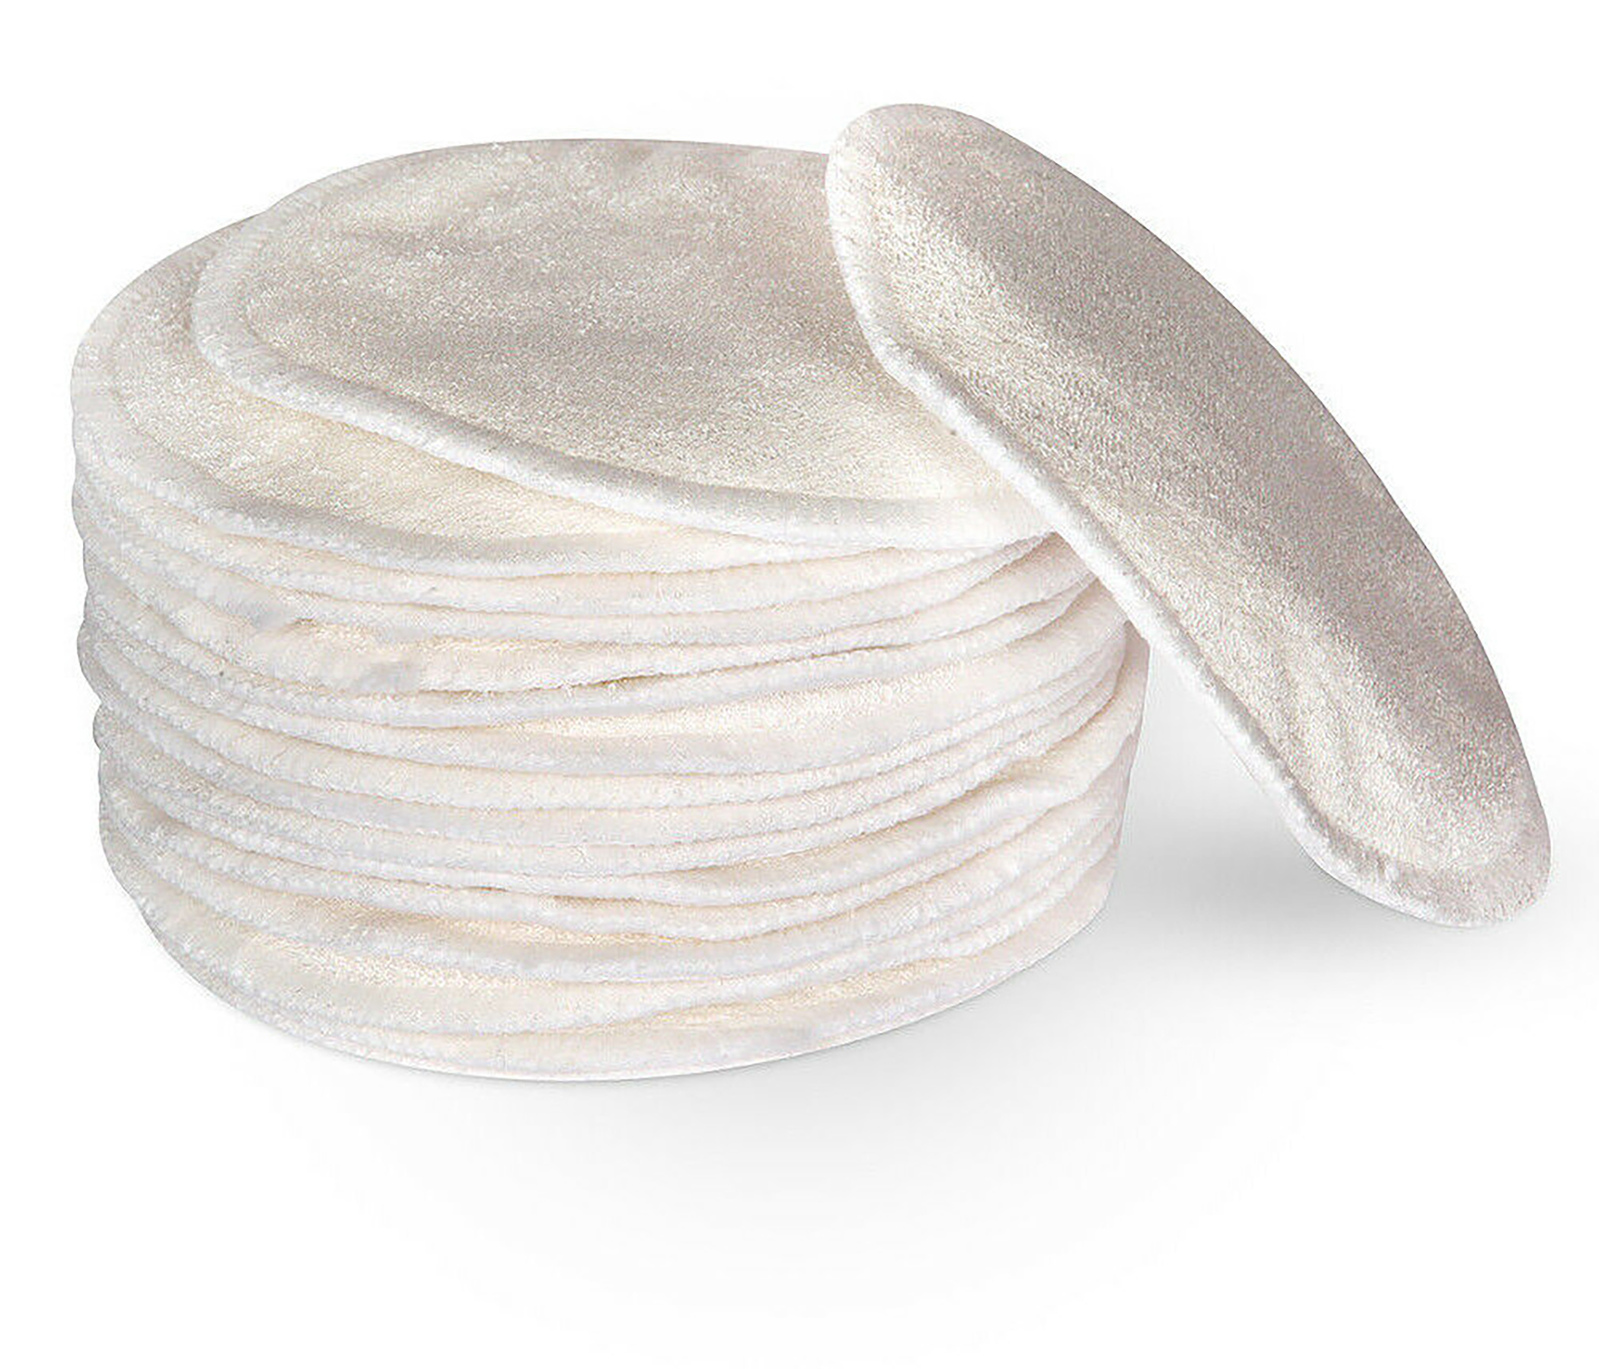 Pile of bamboo breast pads which are round and cream in color